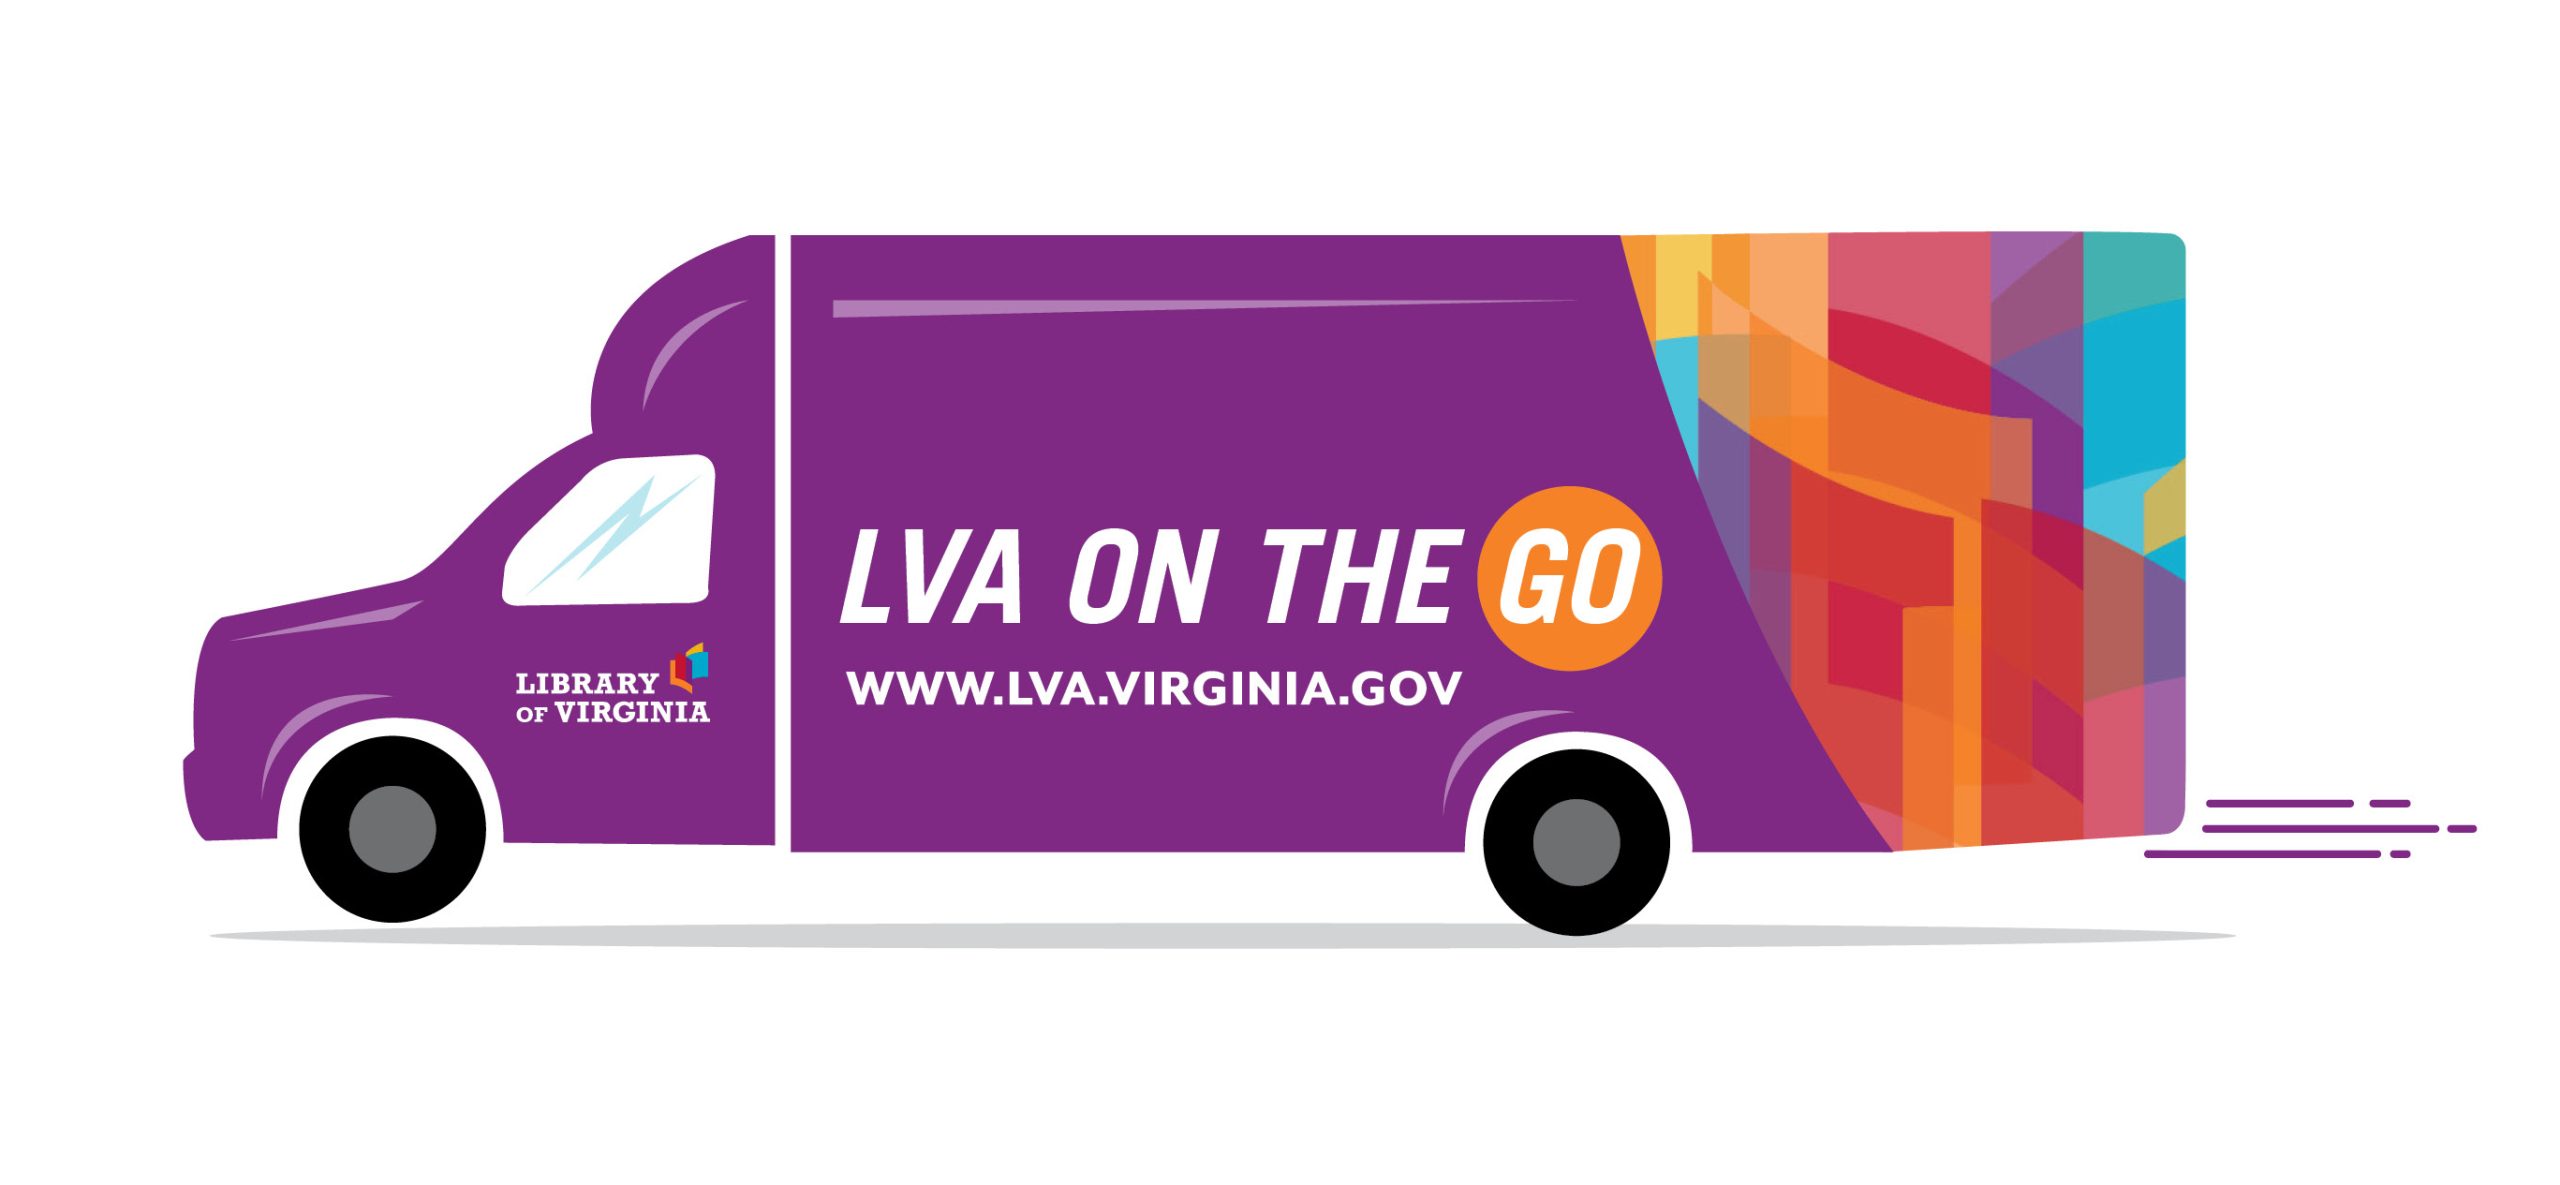 Coming soon to a library near you: LVA On the Go!